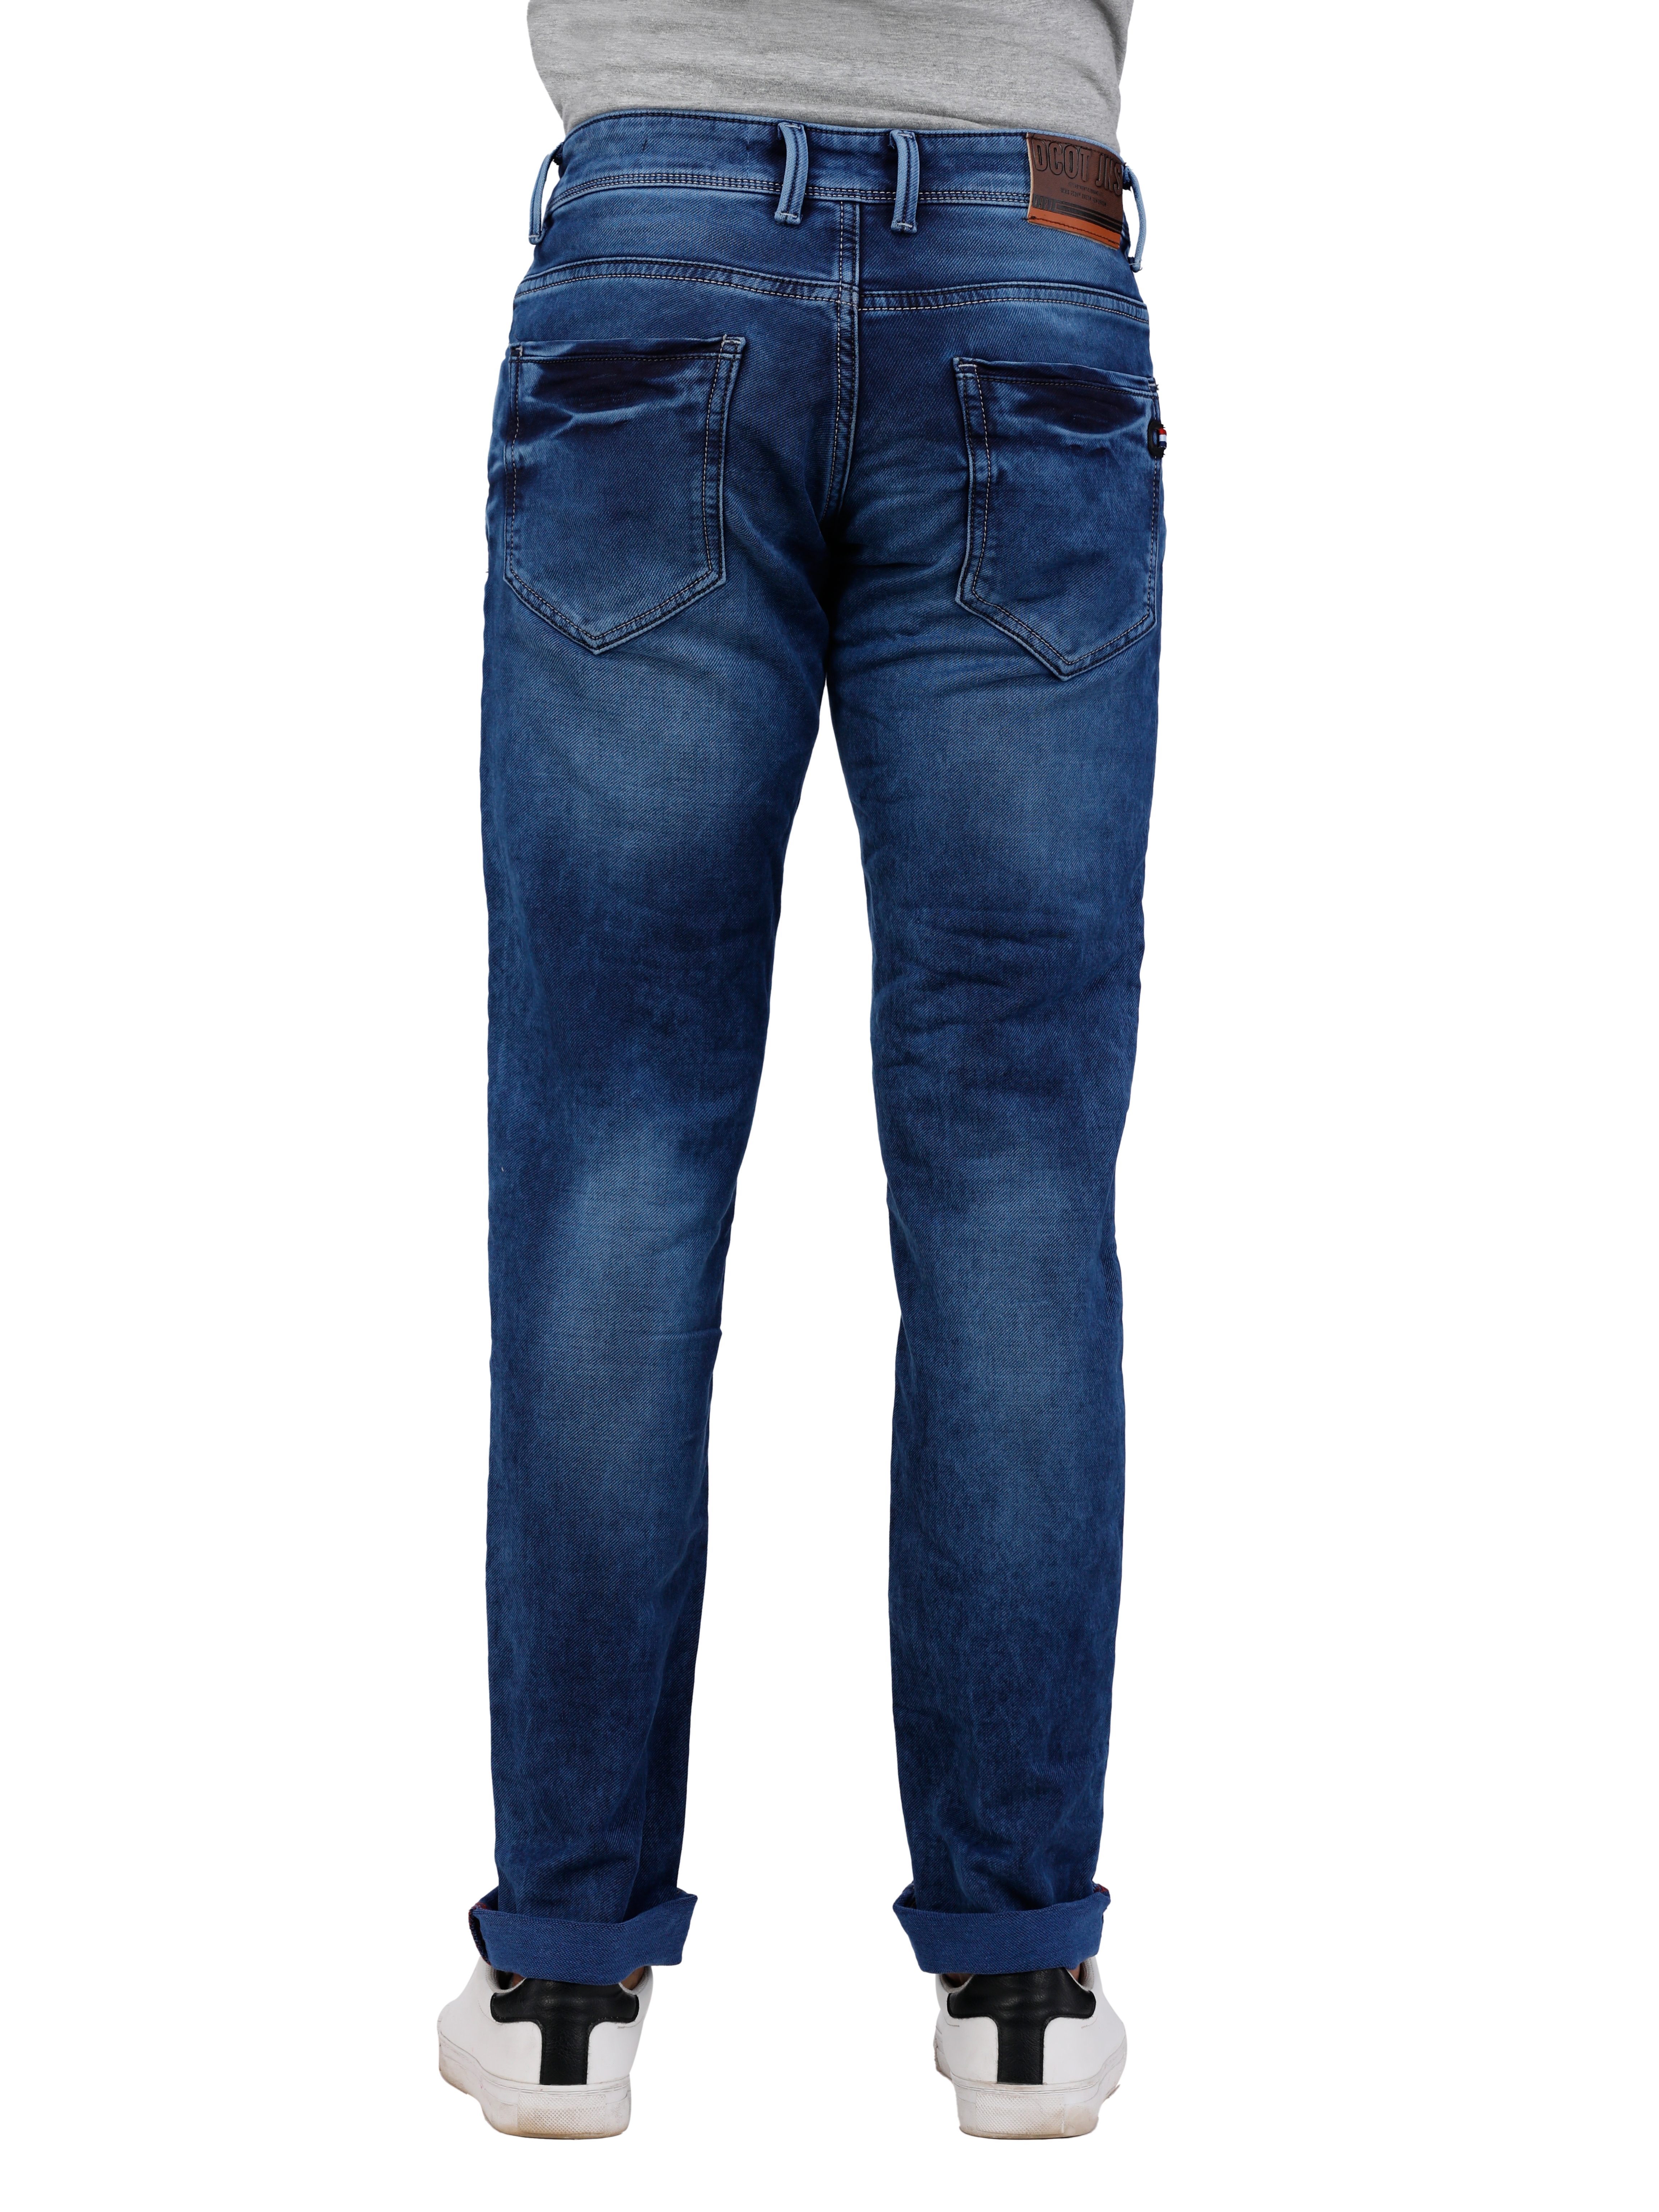 D'cot by Donear | D'cot by Donear Men Blue Cotton Skinny Solid Jeans 1